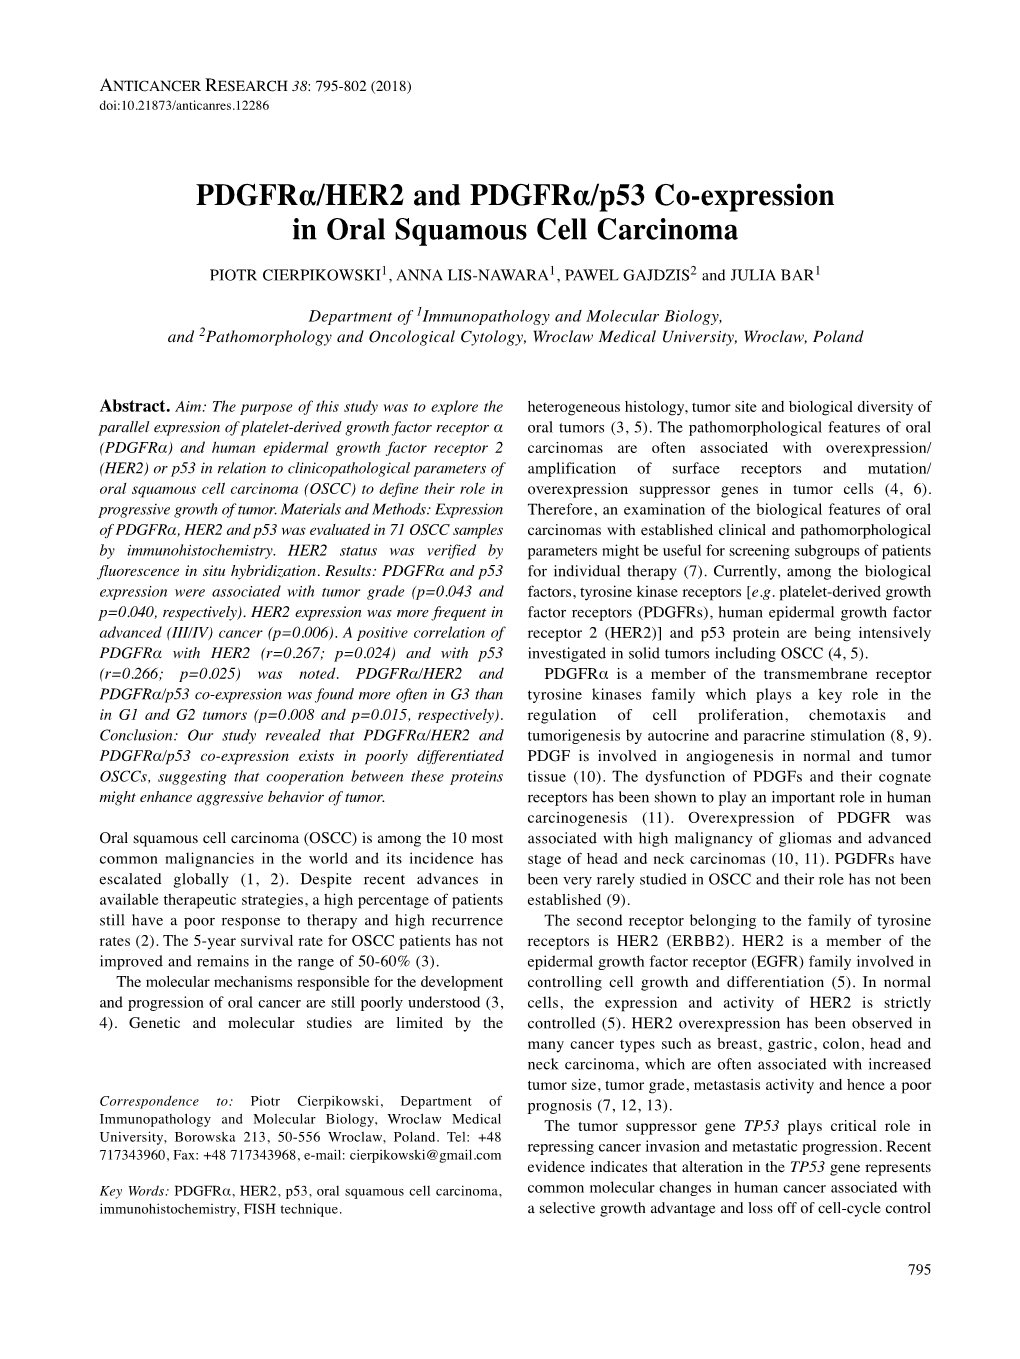 Pdgfrα/HER2 and Pdgfrα/P53 Co-Expression in Oral Squamous